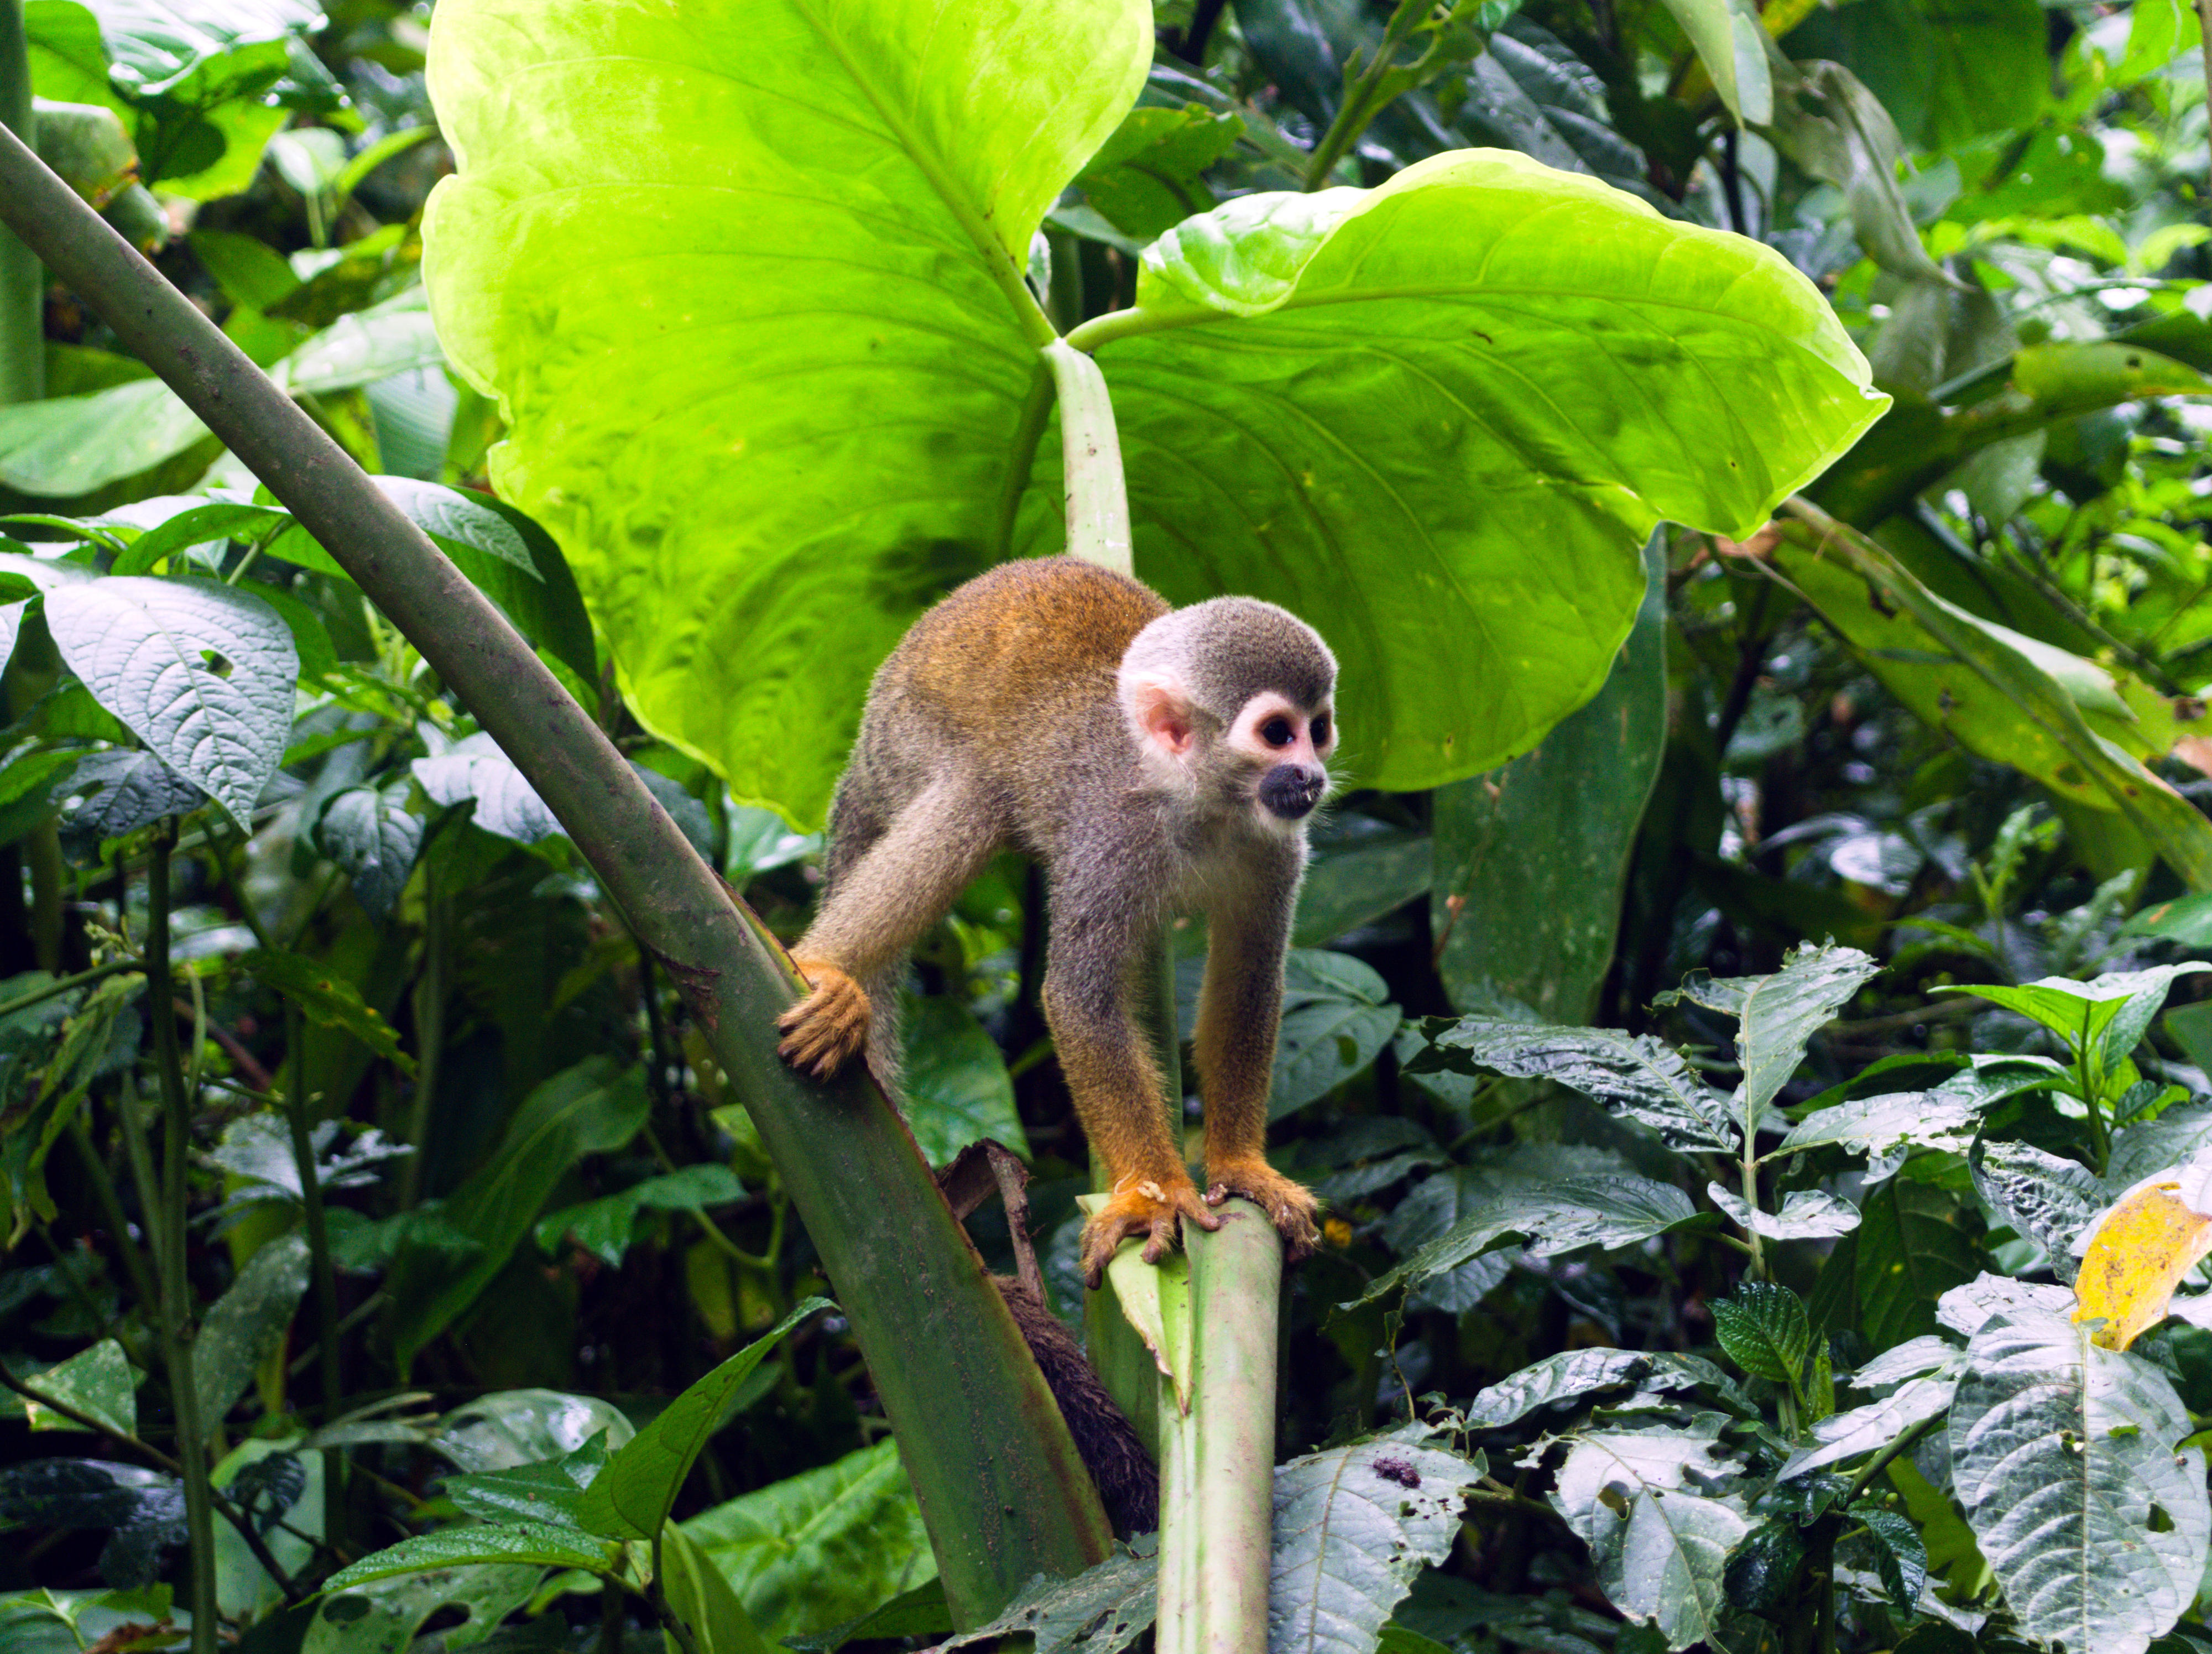 A squirrel monkey in Colombia climbs over the stem of a large leafy plant